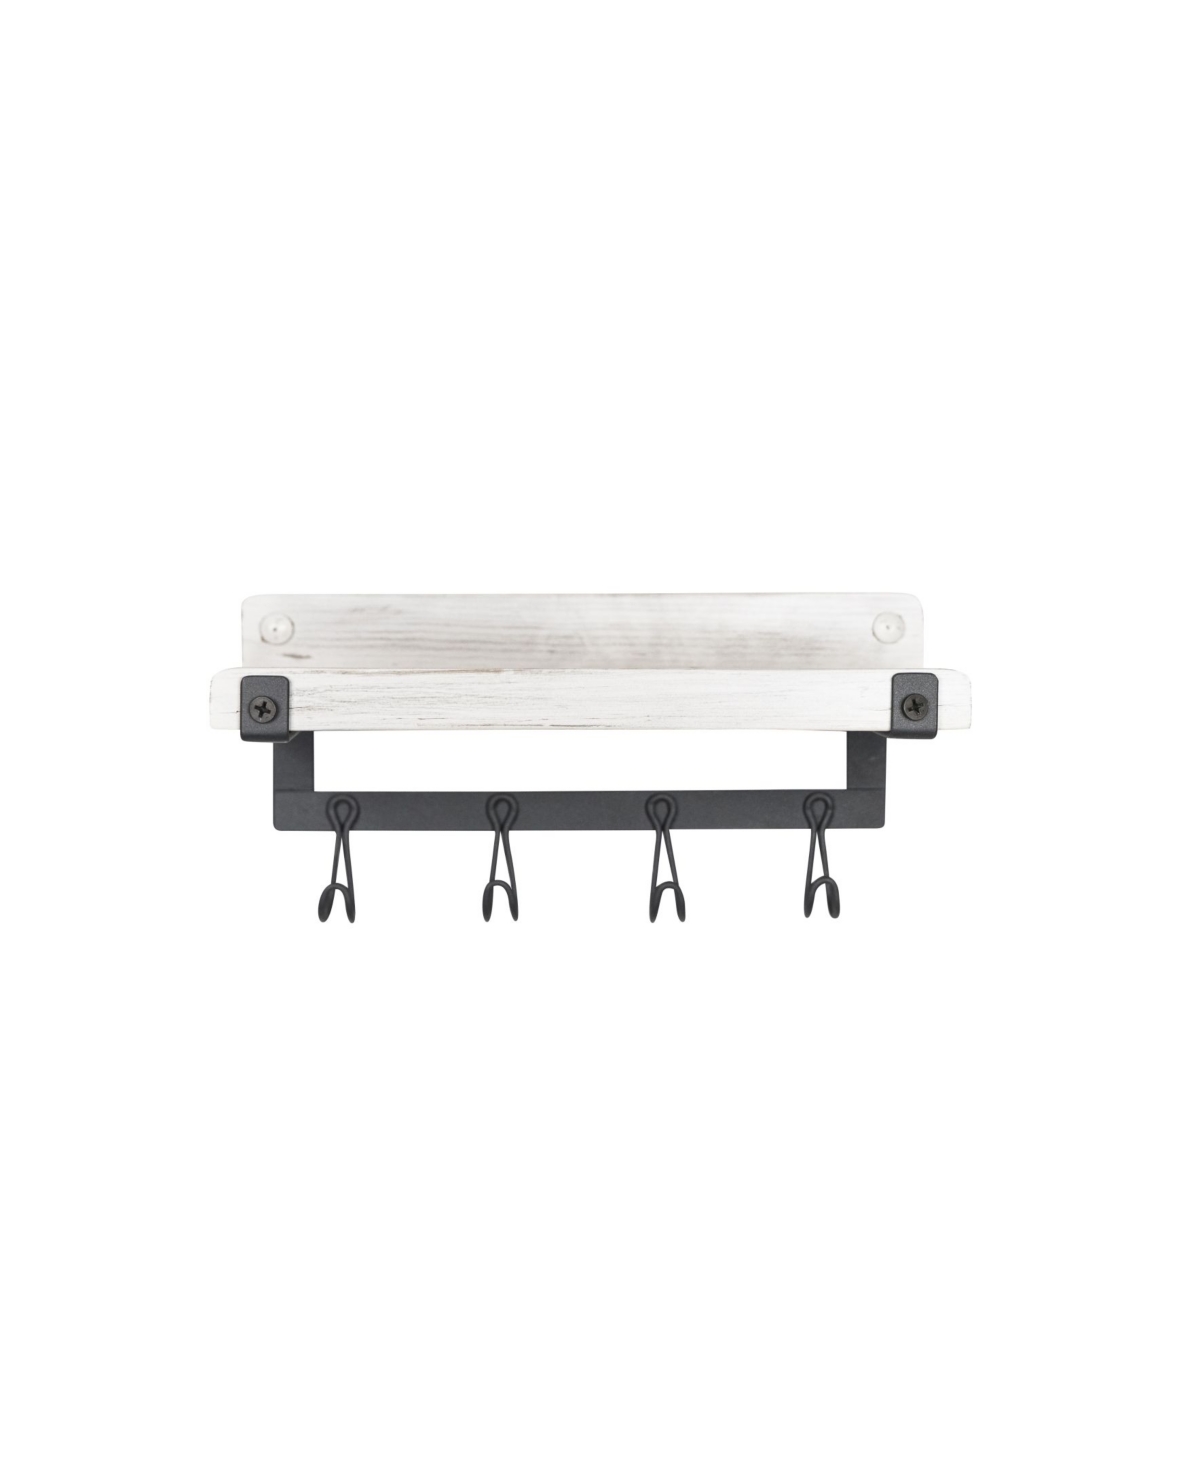 Spectrum Rowan Wall Mount Valet Hook Station In White Wash And Industrial Gray